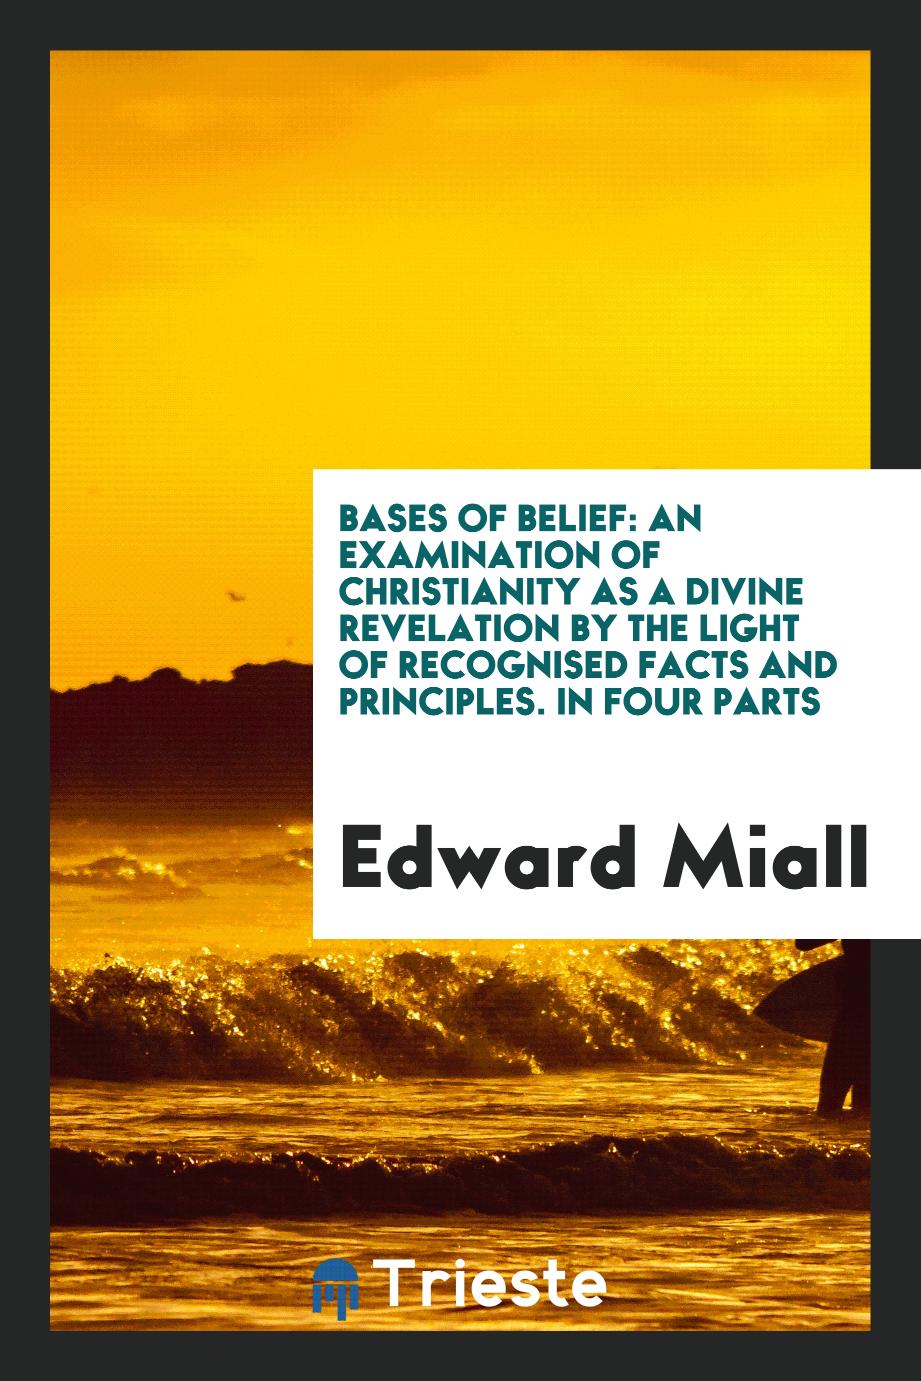 Bases of Belief: An Examination of Christianity as a Divine Revelation by the Light of Recognised Facts and Principles. In Four Parts